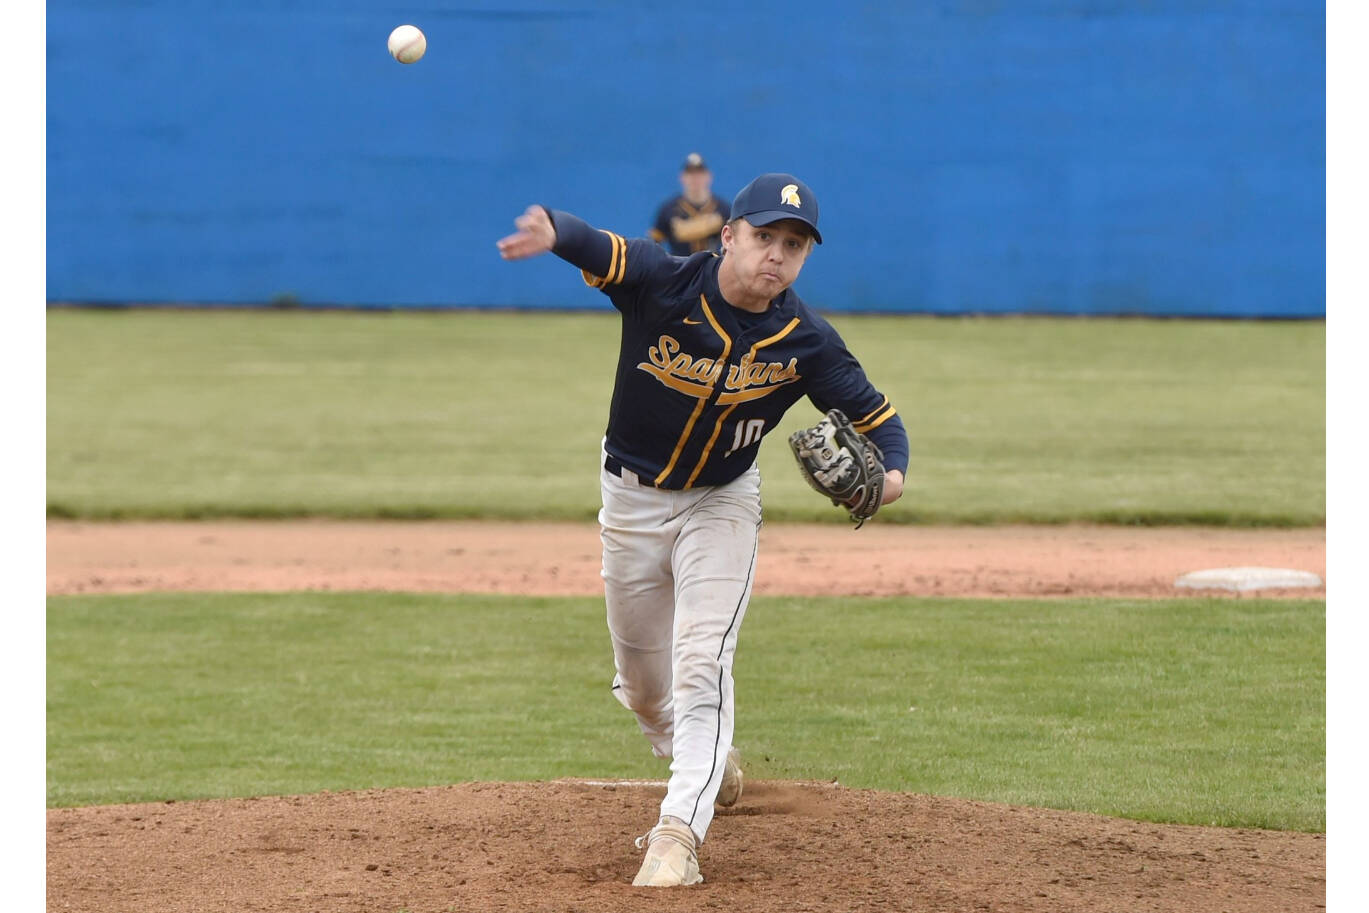 Forks' Logan Olson pitches a shutout against Ilwaco in the Southwest 2B district tournament Friday. Olson finished with nine strikeouts in a 7-0 win. (Jordan Nailon/Longview Daily News)